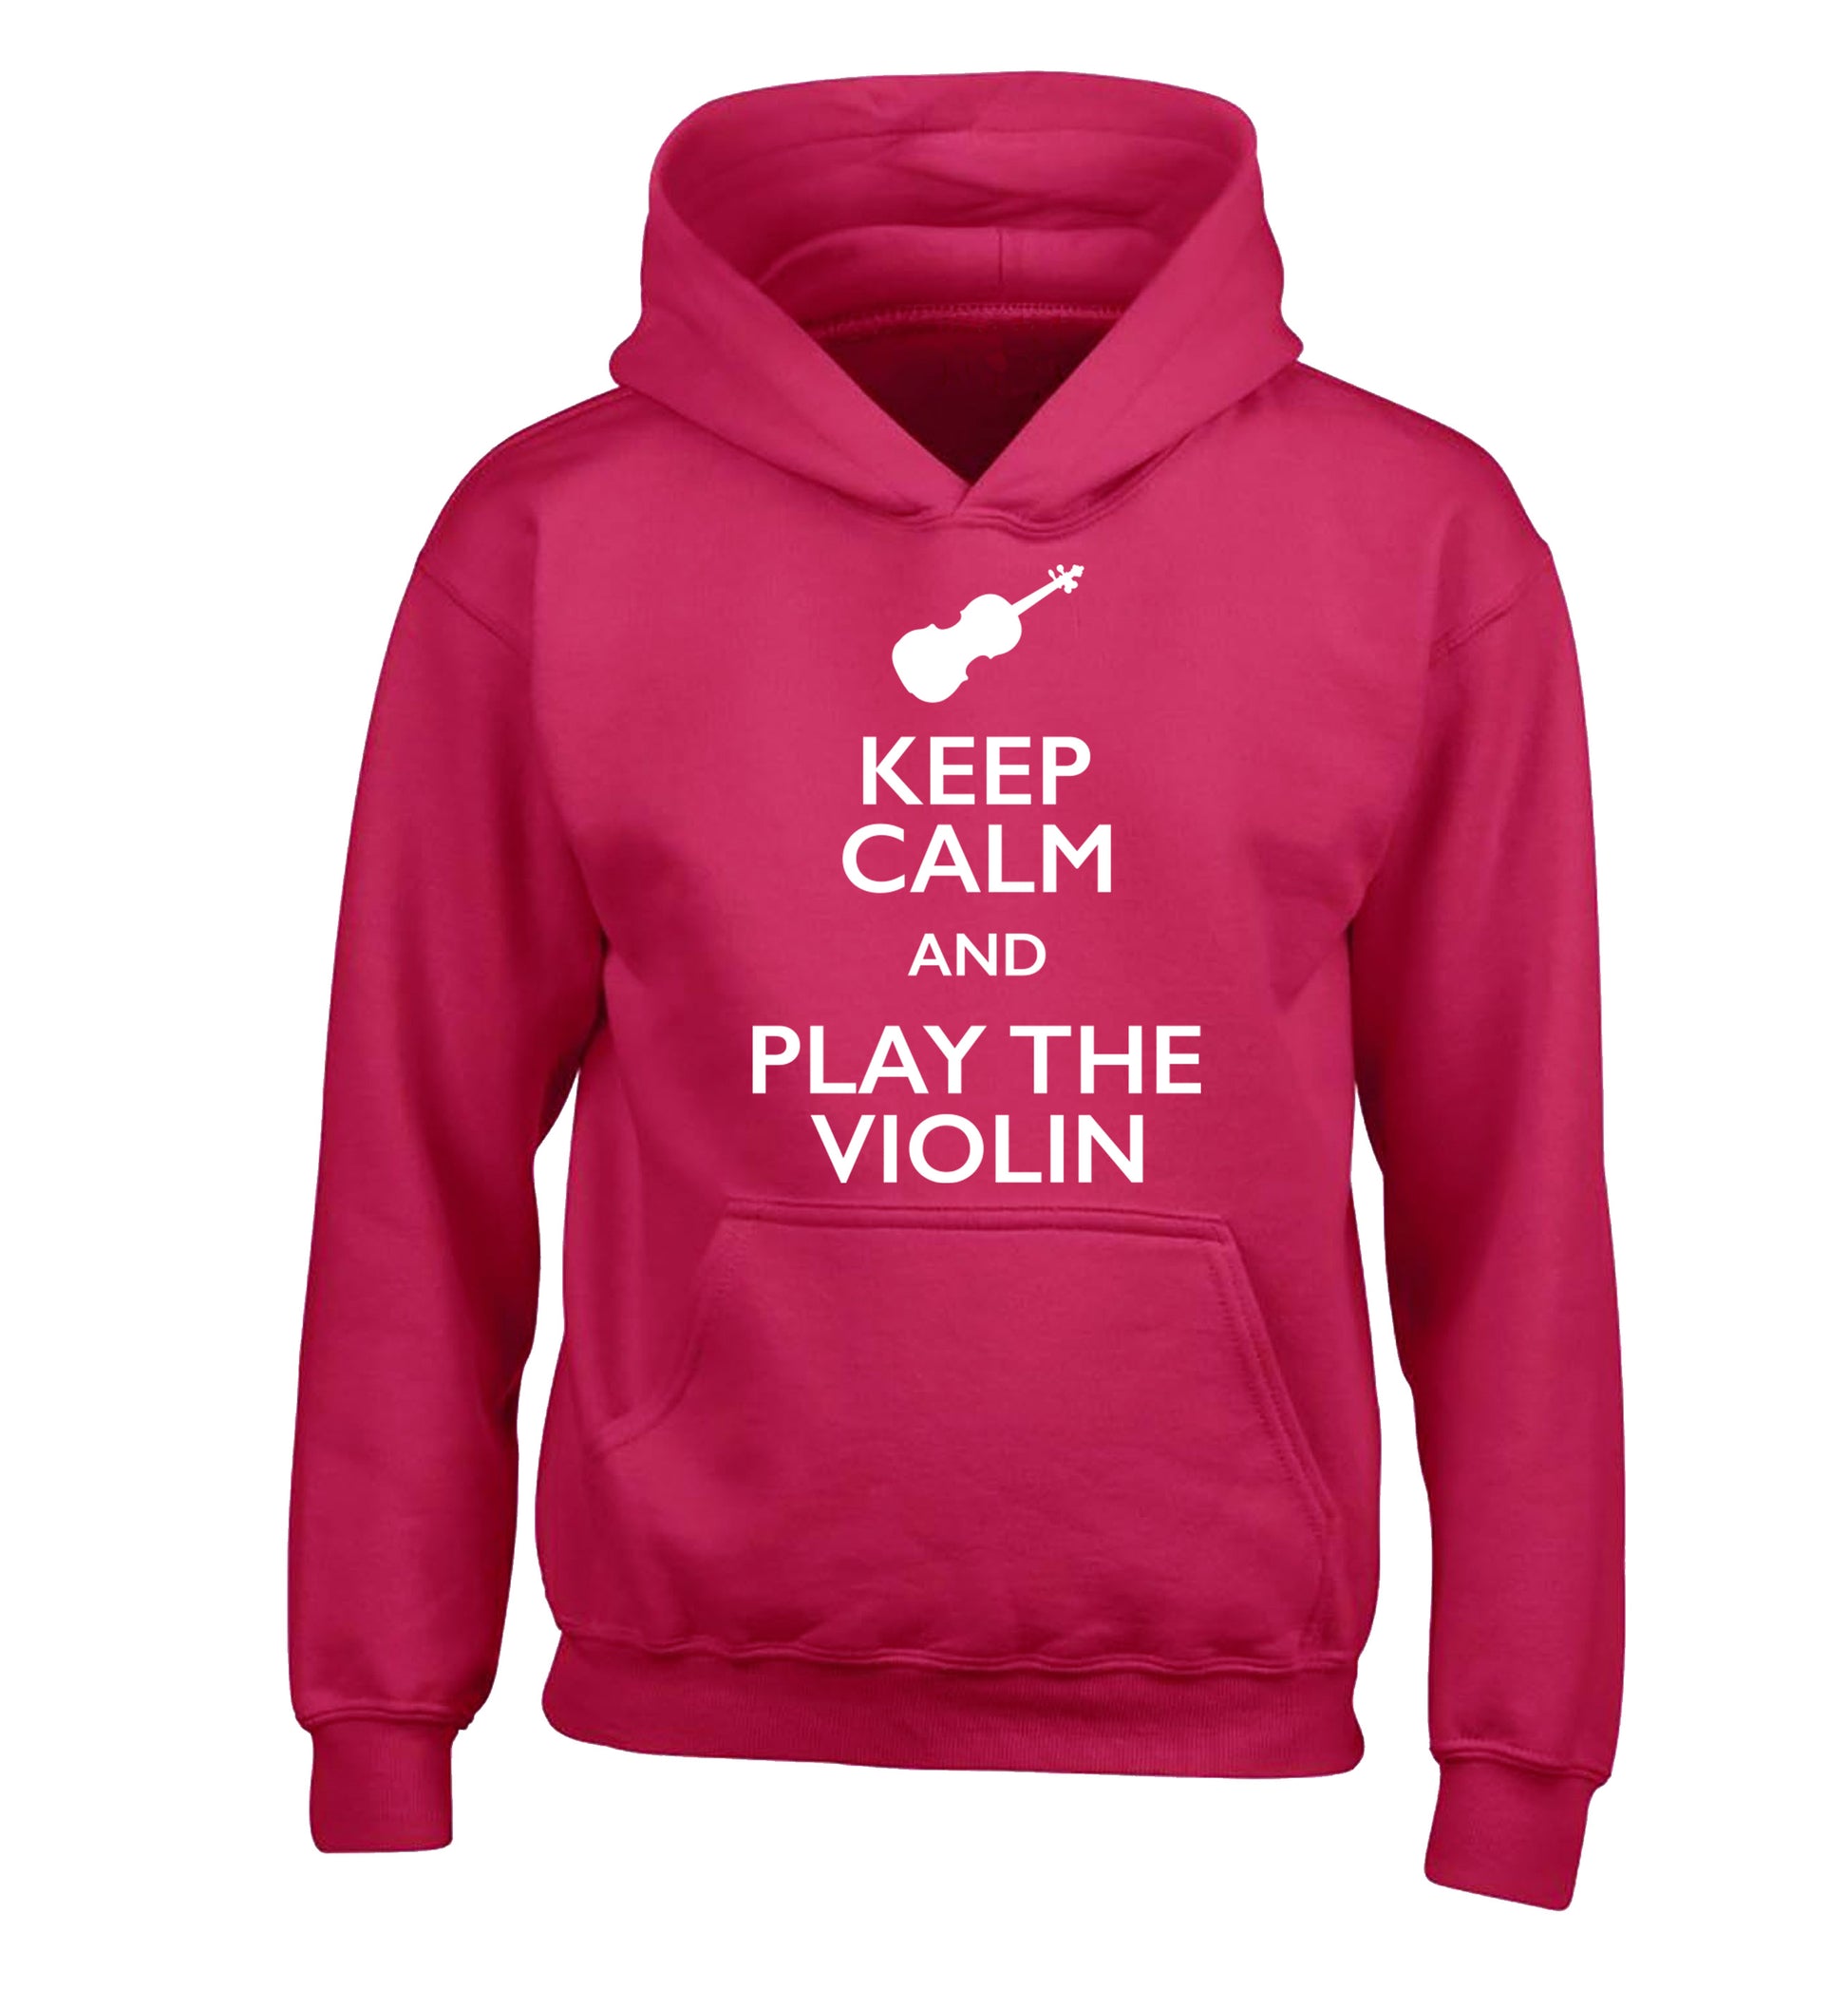 Keep calm and play the violin children's pink hoodie 12-13 Years